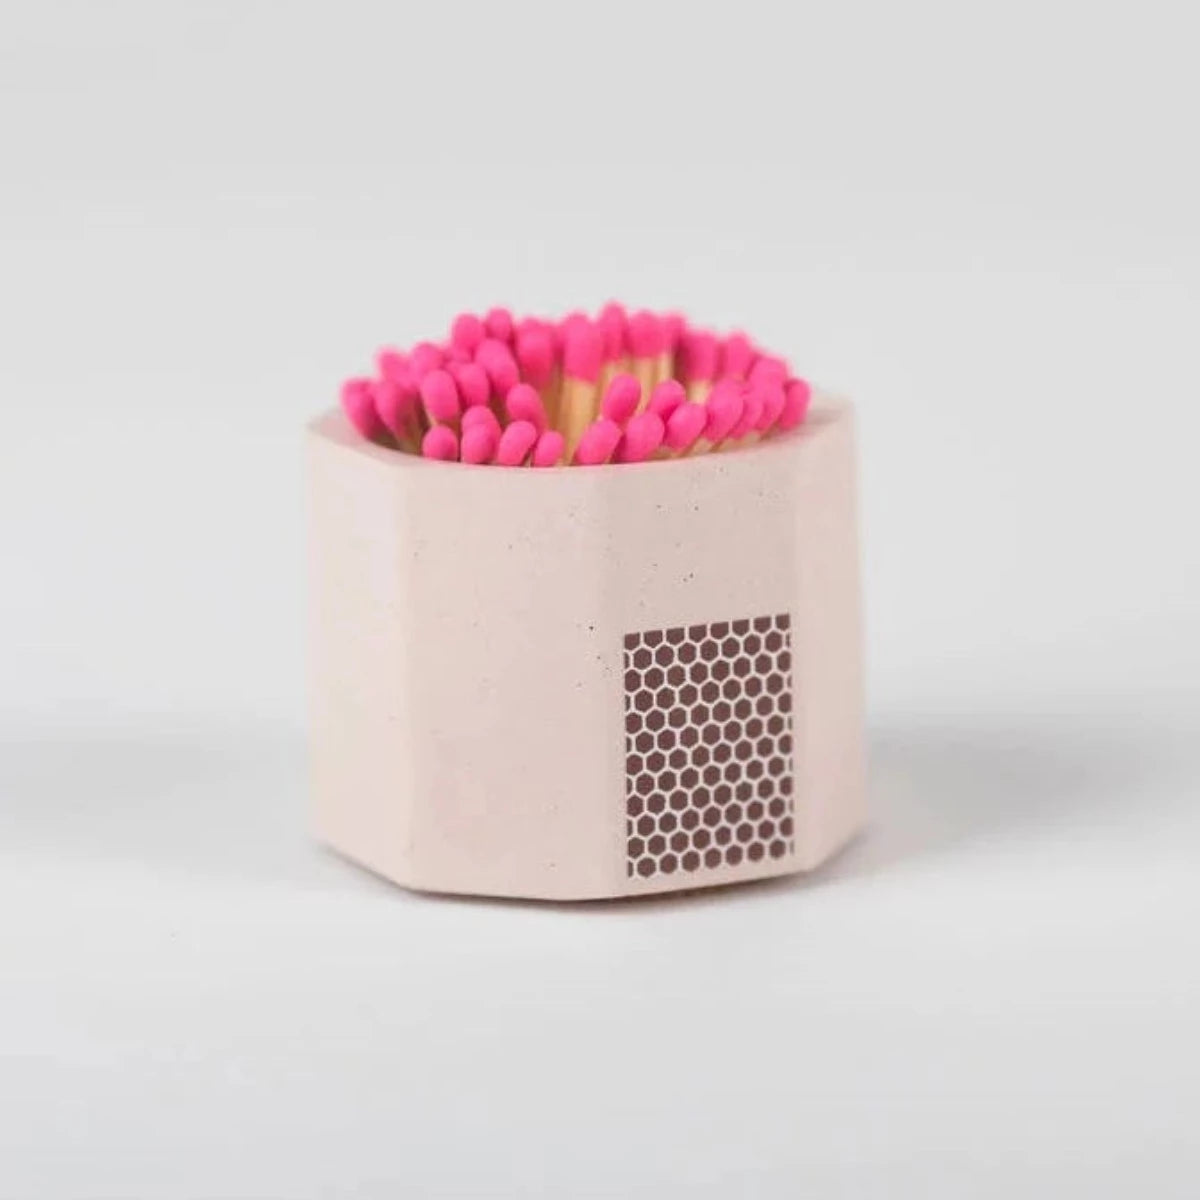 Pale Pink Match Holder w/ Striker and Pink Matches